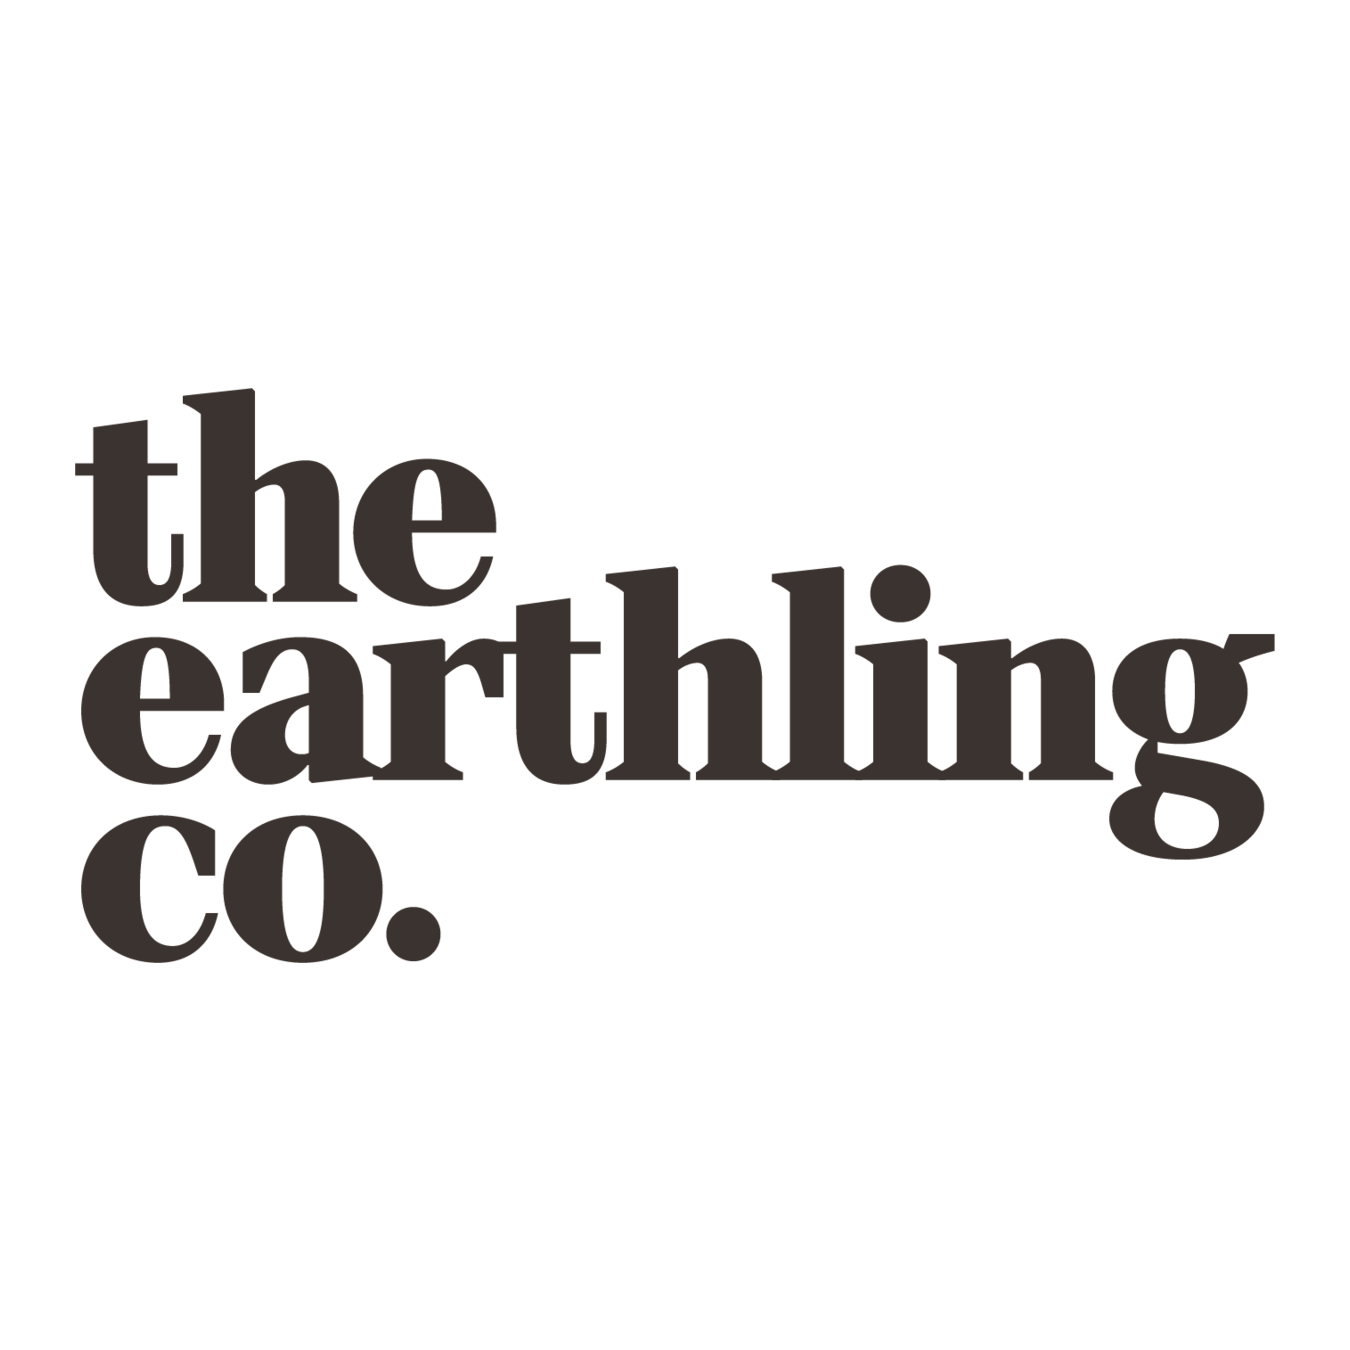 Shop for zero waste shampoo and conditioner bars and other eco conscious products at The Earthling Co.